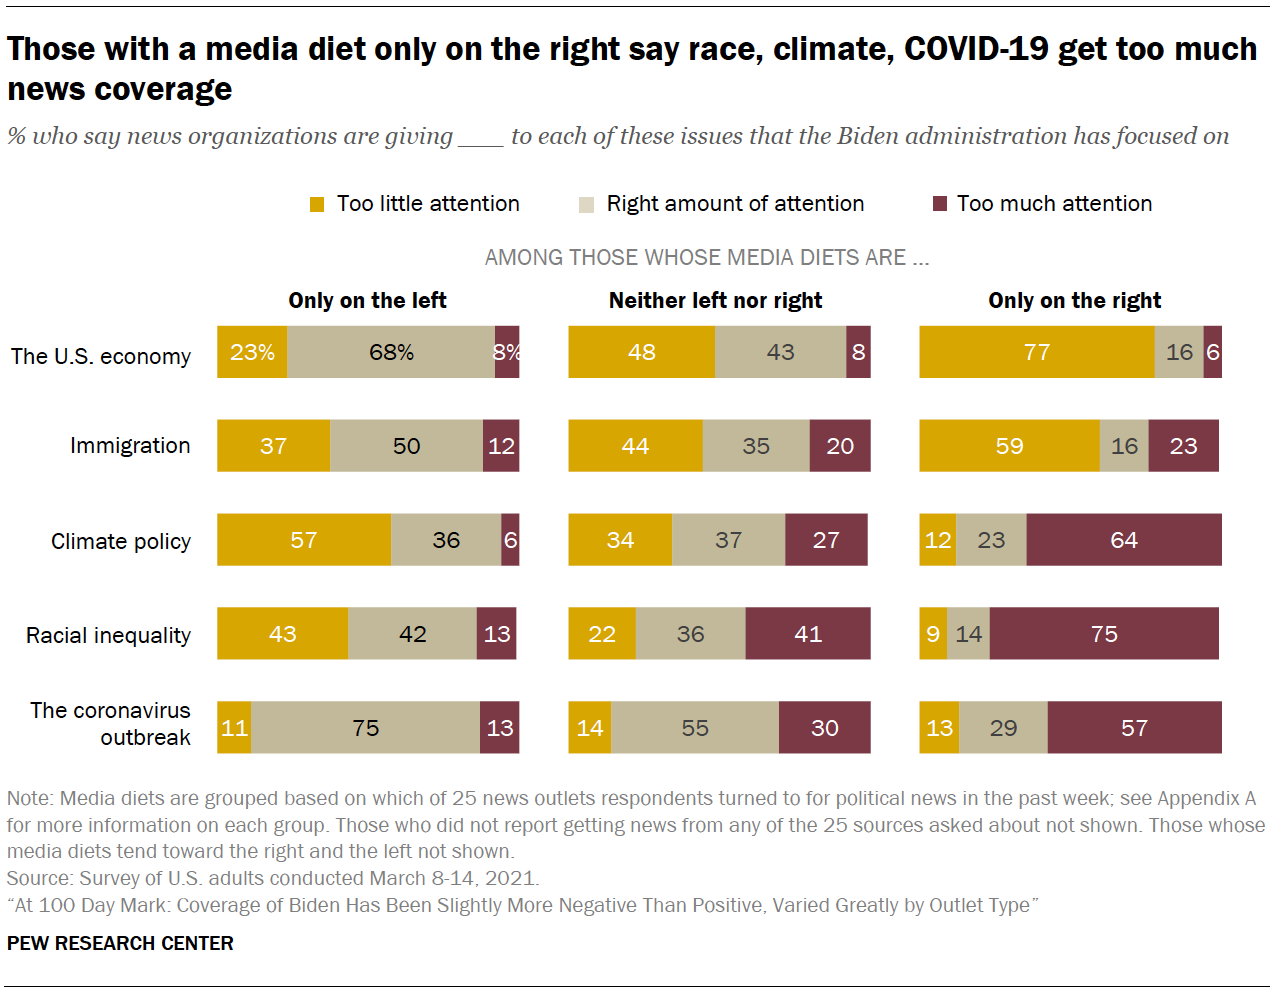 Those with a media diet only on the right say race, climate, COVID-19 get too much news coverage